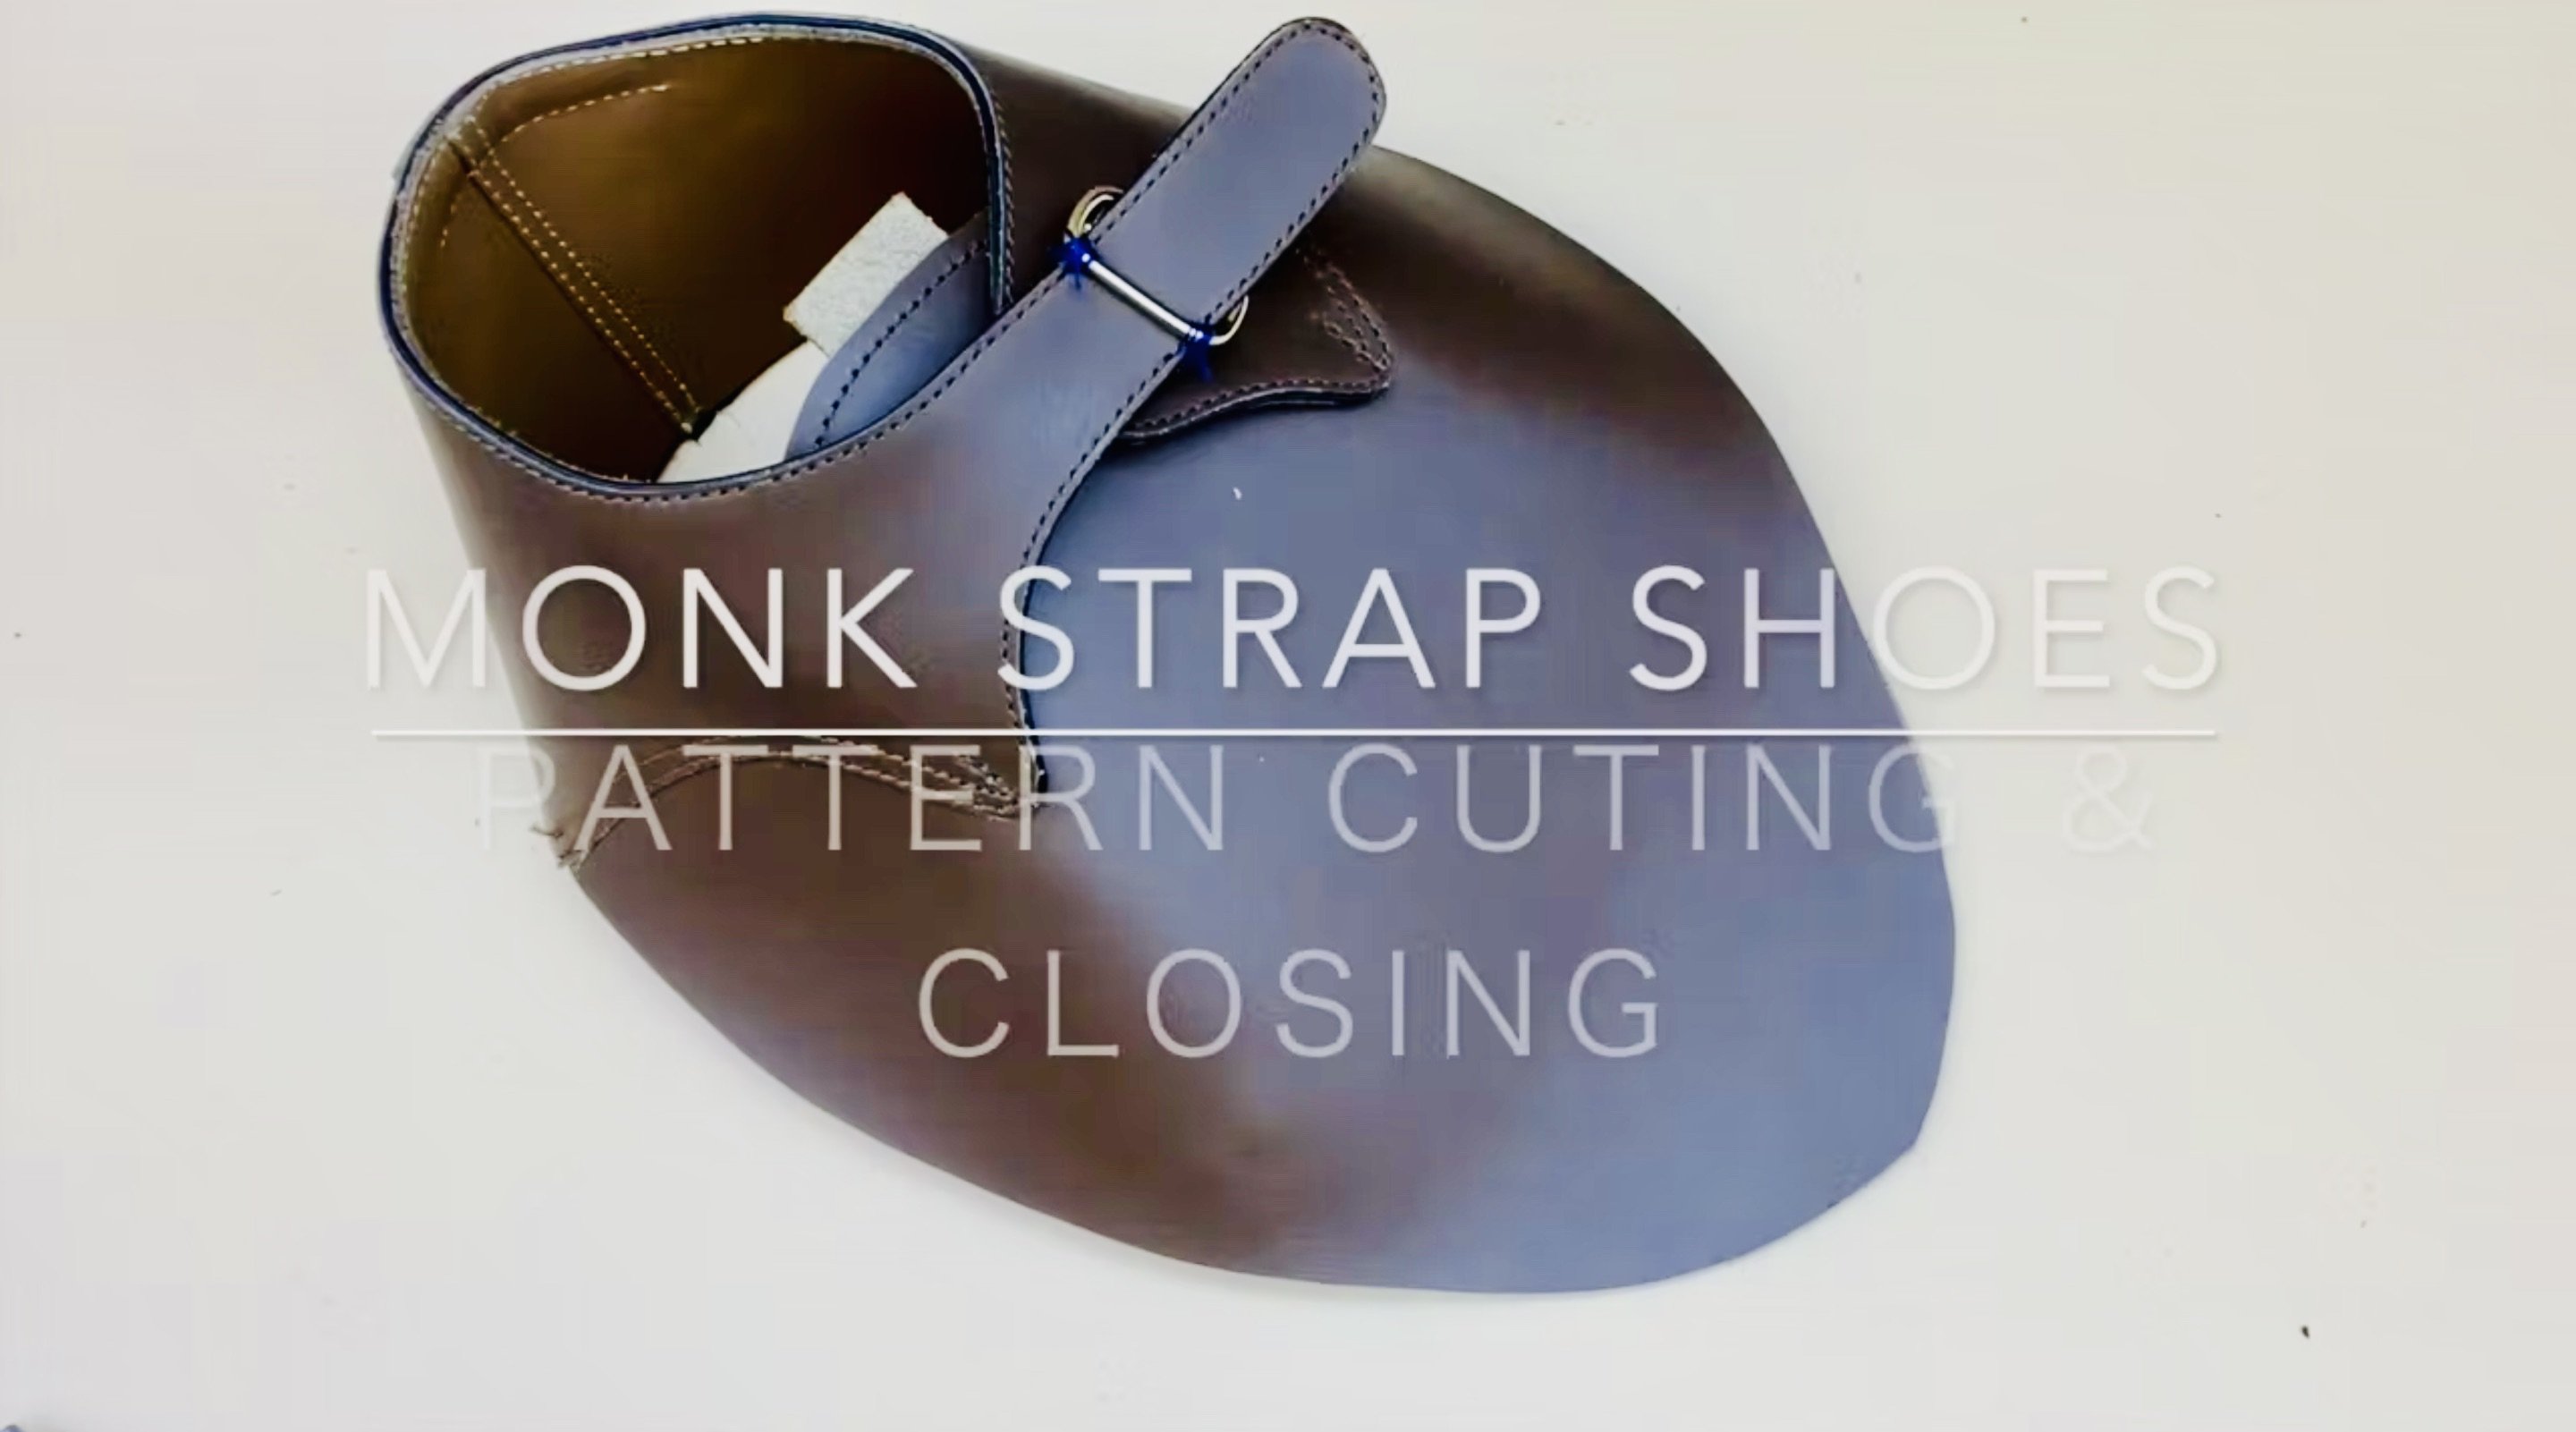 BWS FILM – How to make a “MONK STRAP – PATTERN CUTTING & CLOSING”